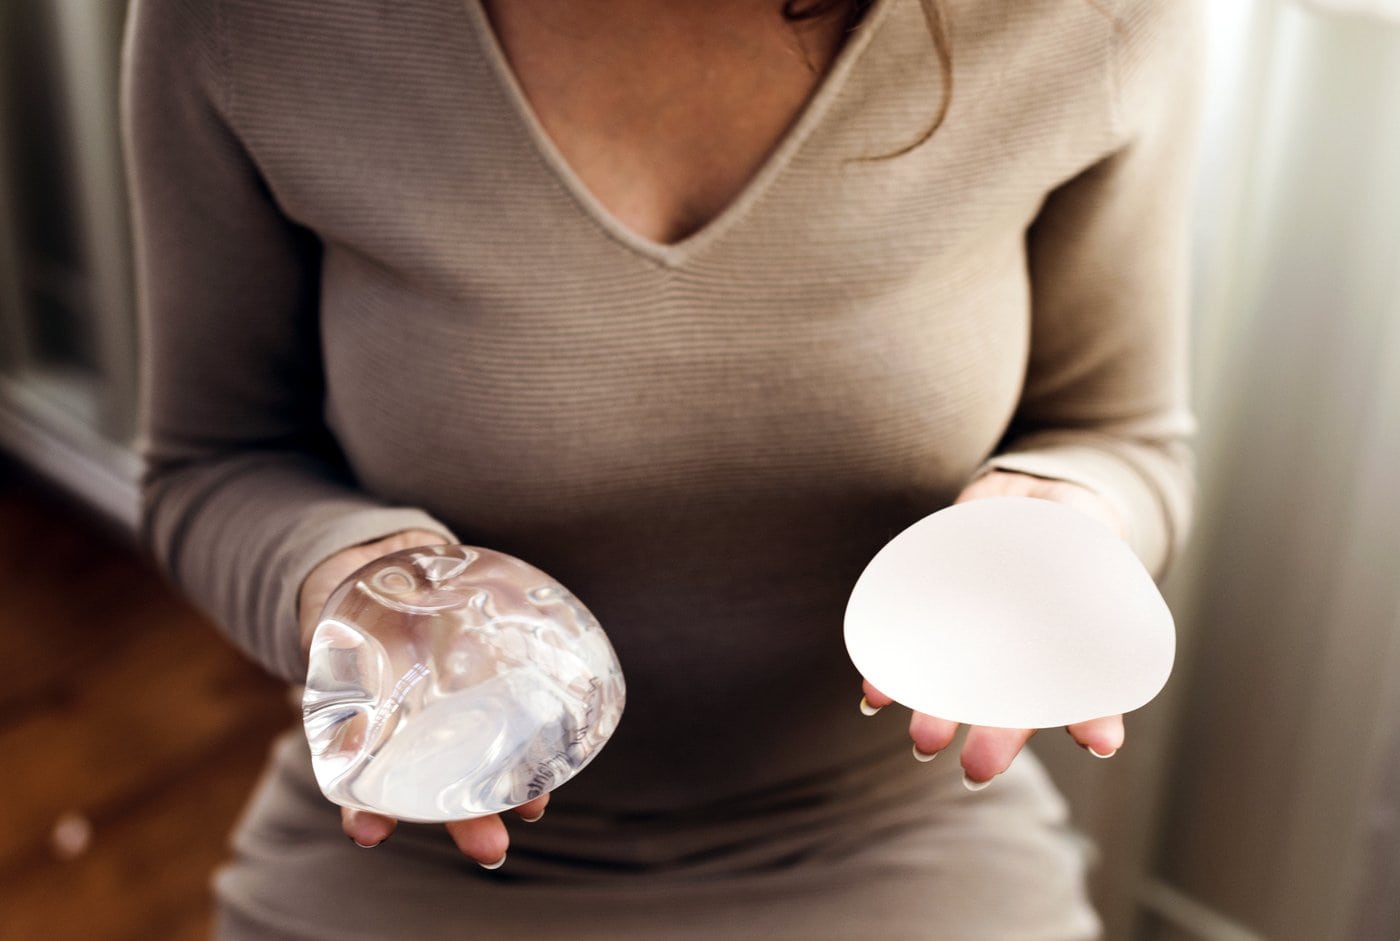 Woman holding silicone breast implants for plastic surgery